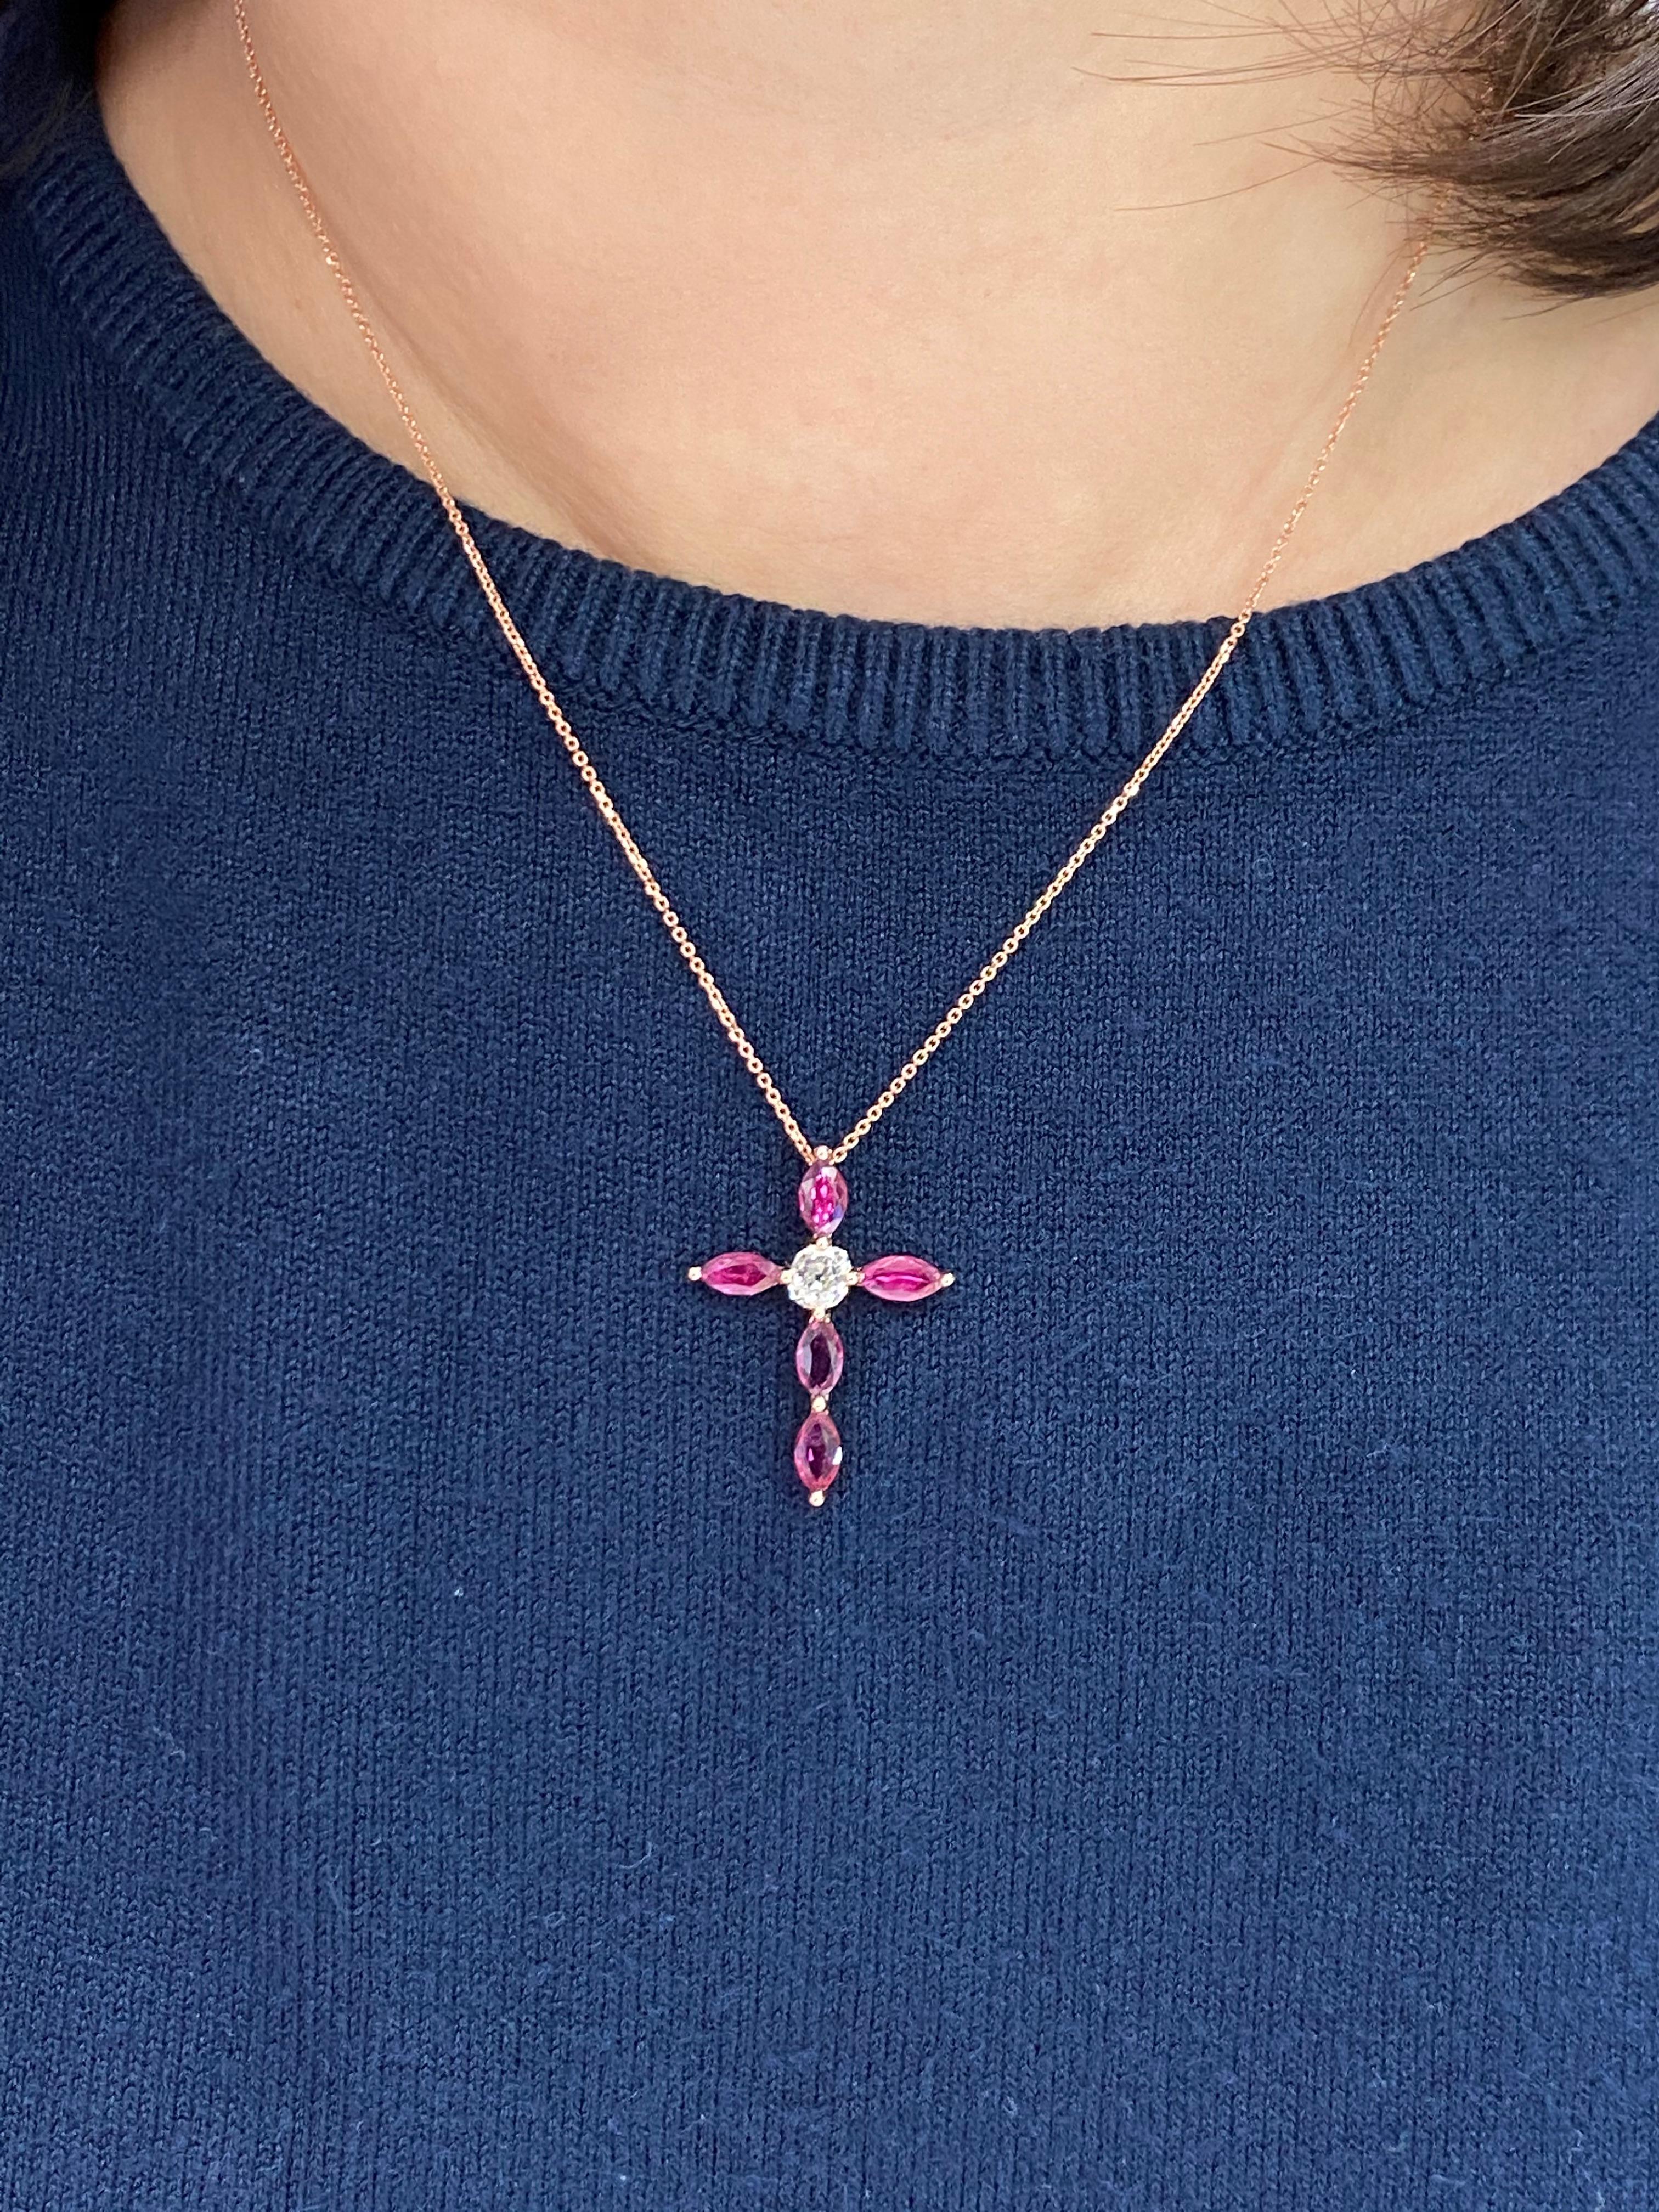 This is a beautiful classic cross pendant. It is set in 18k Rose gold and one true antique old mine cut diamond. In the center is one antique OMC diamond 0.48 cts. There are 5 Marquis shaped Burma rubies with a total carat weight of 1.32 cts that